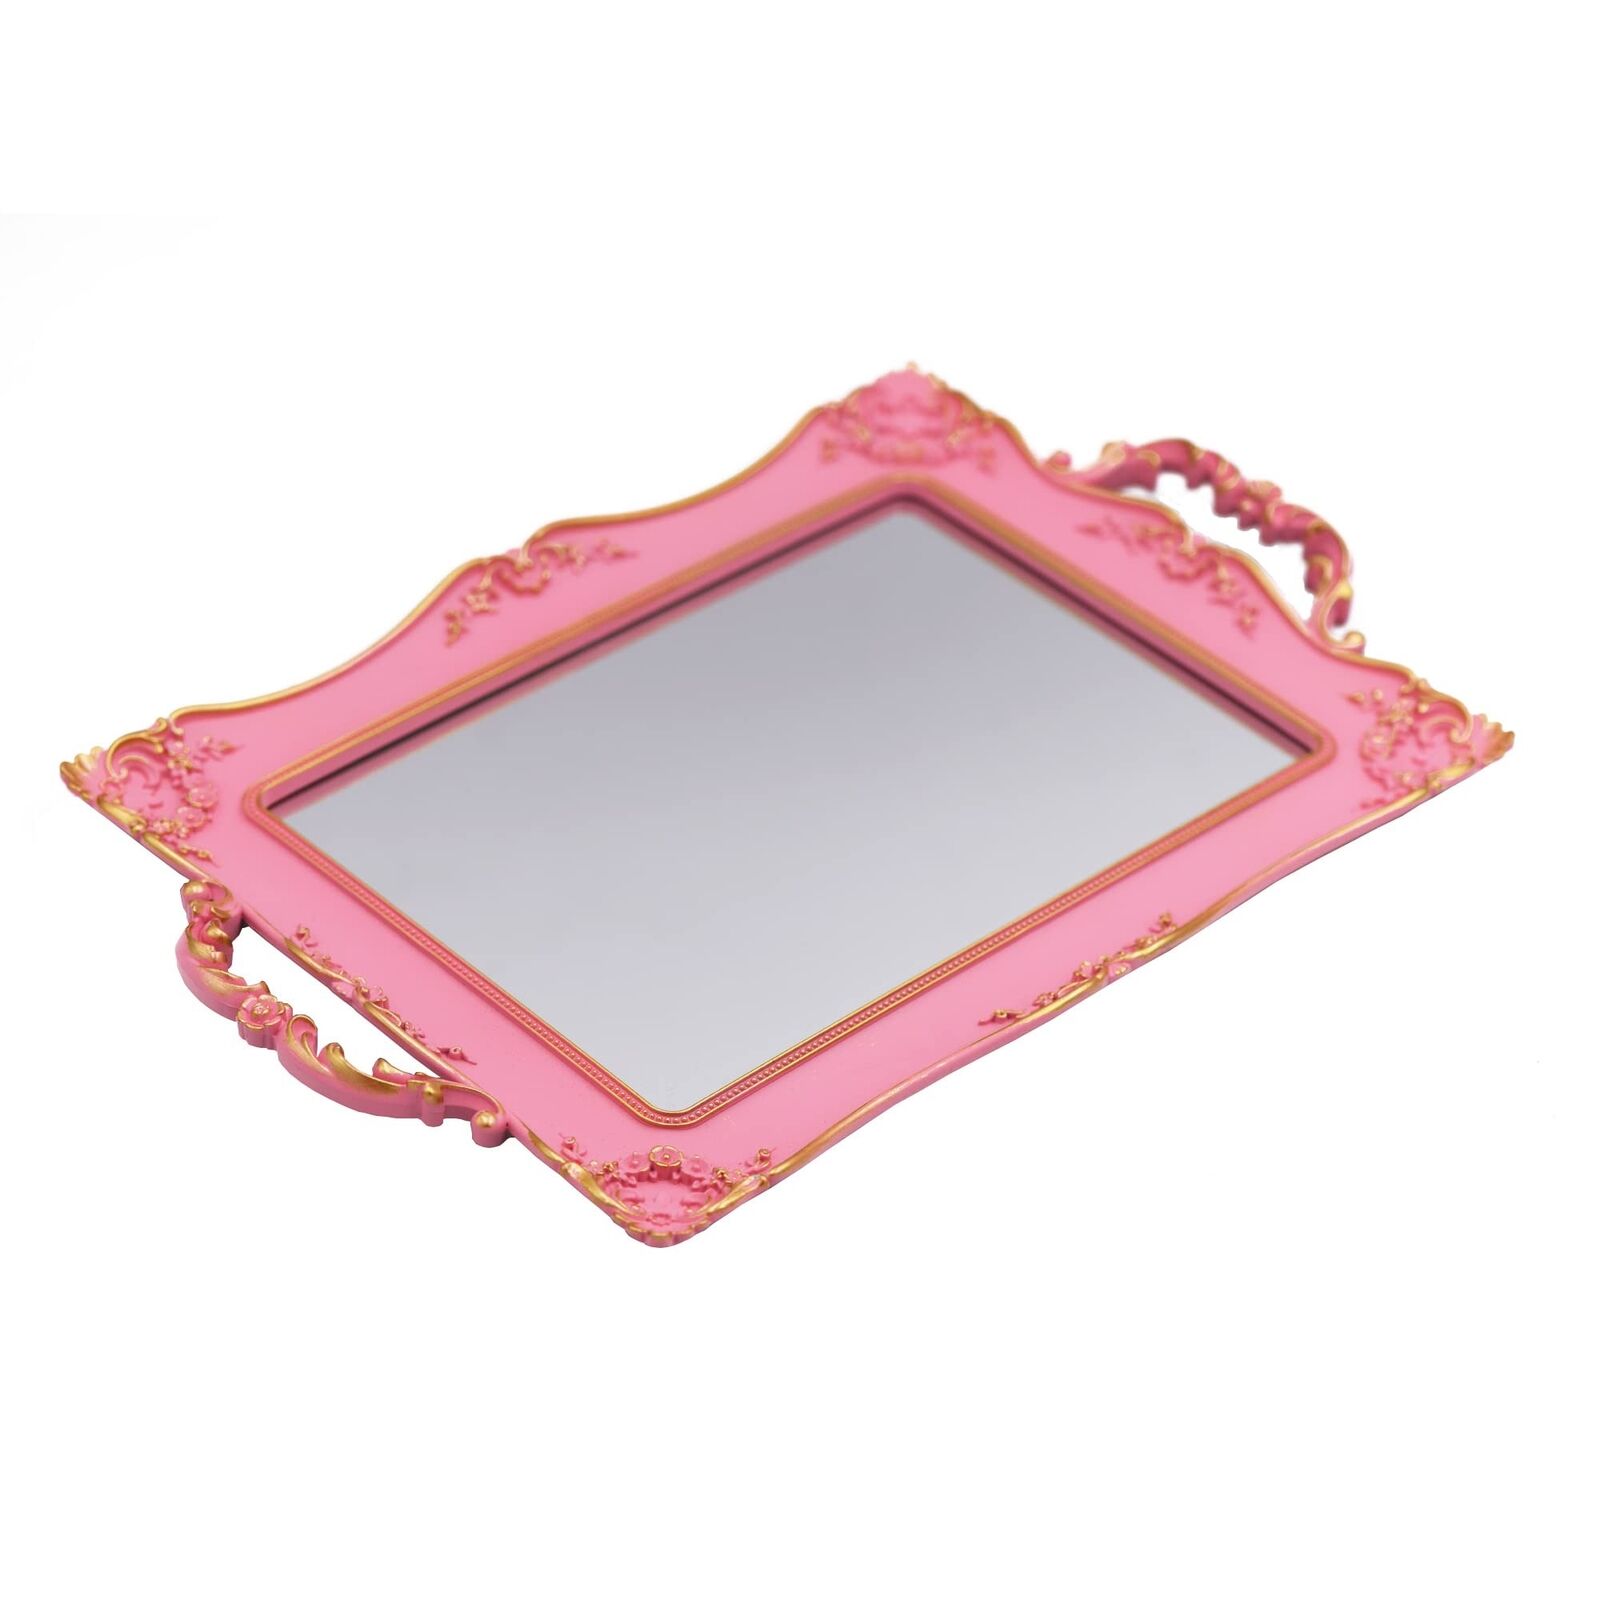 Tstarer Antique Decorative Pink Framed Square Mirror Tray, Jewelry & Cosmetic...